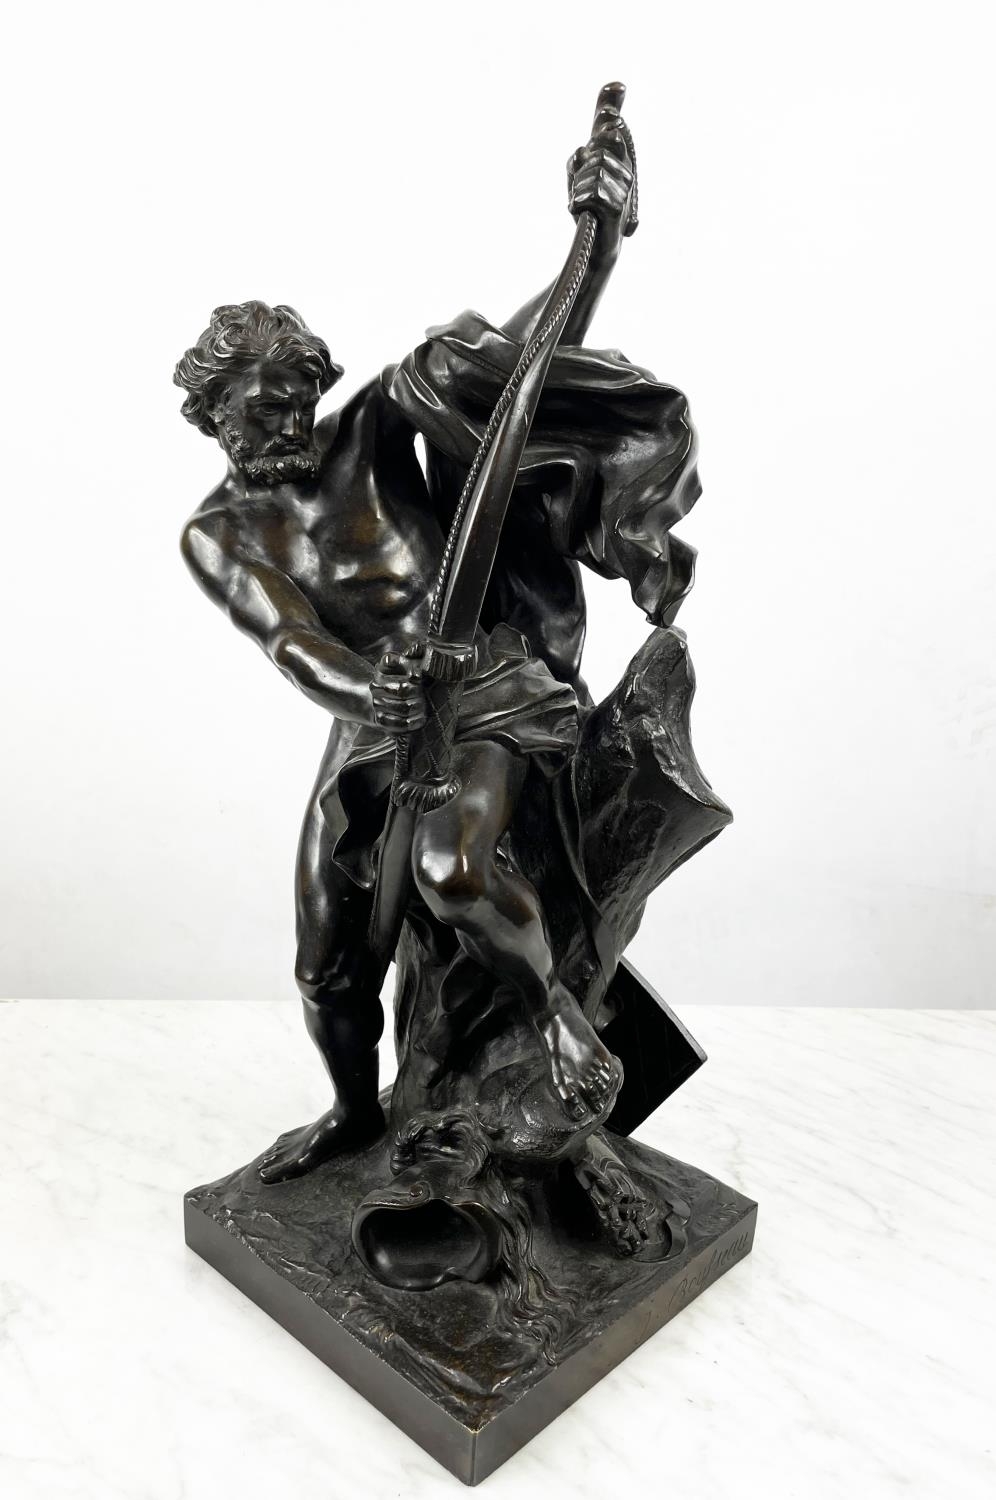 JACQUES BOUSSEAU, French (1681-1740) Ulysse stringing his bow, late 19th century bronze, 48cm H.